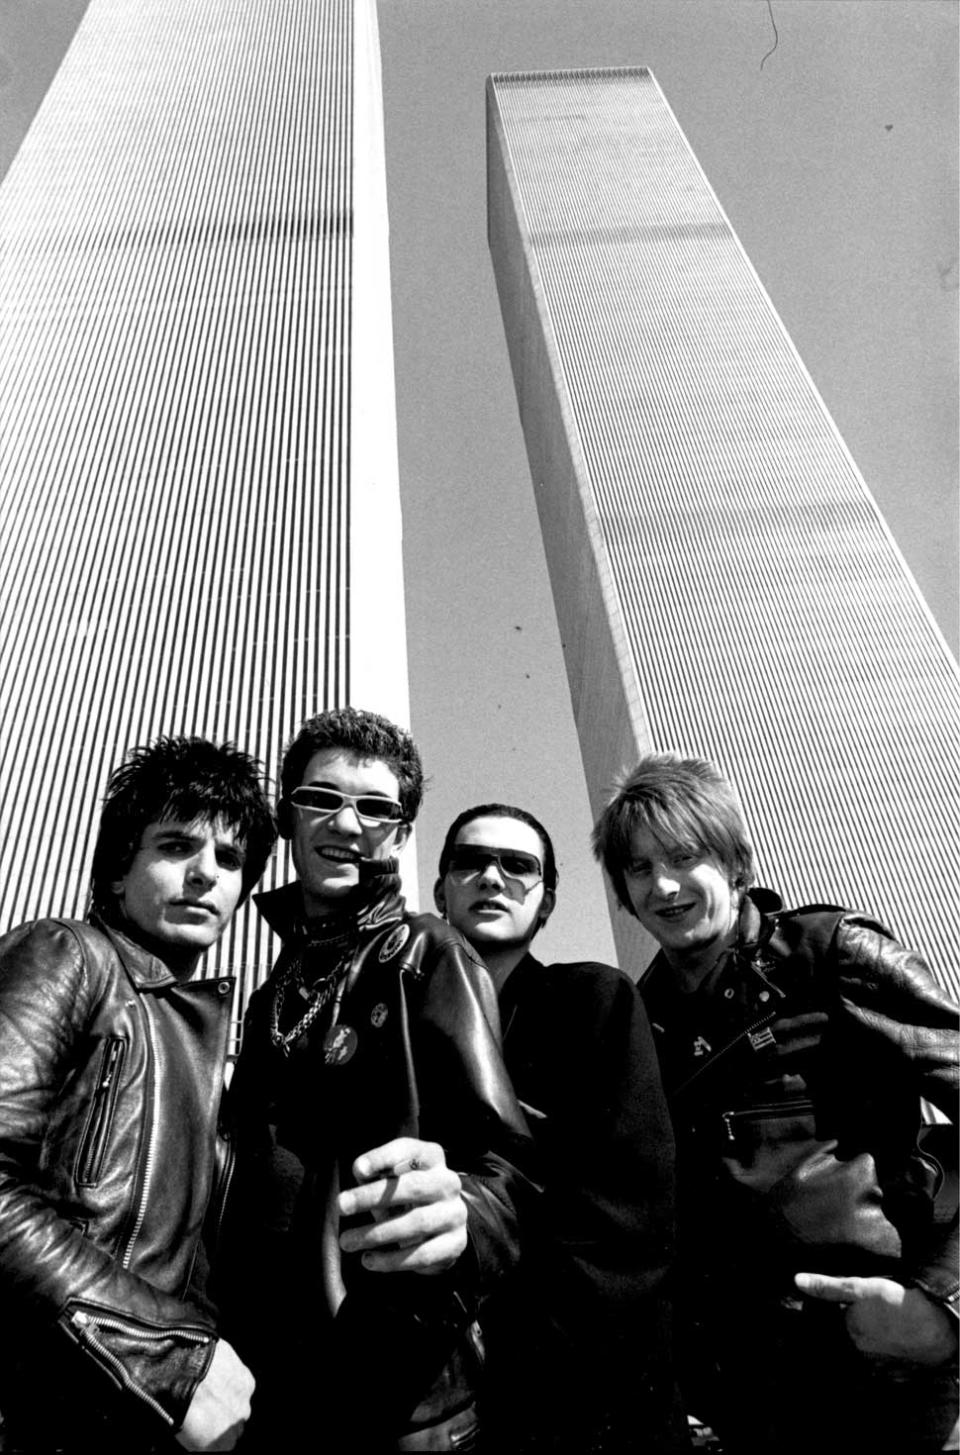 The Damned standing in front of the Twin Towers in New York